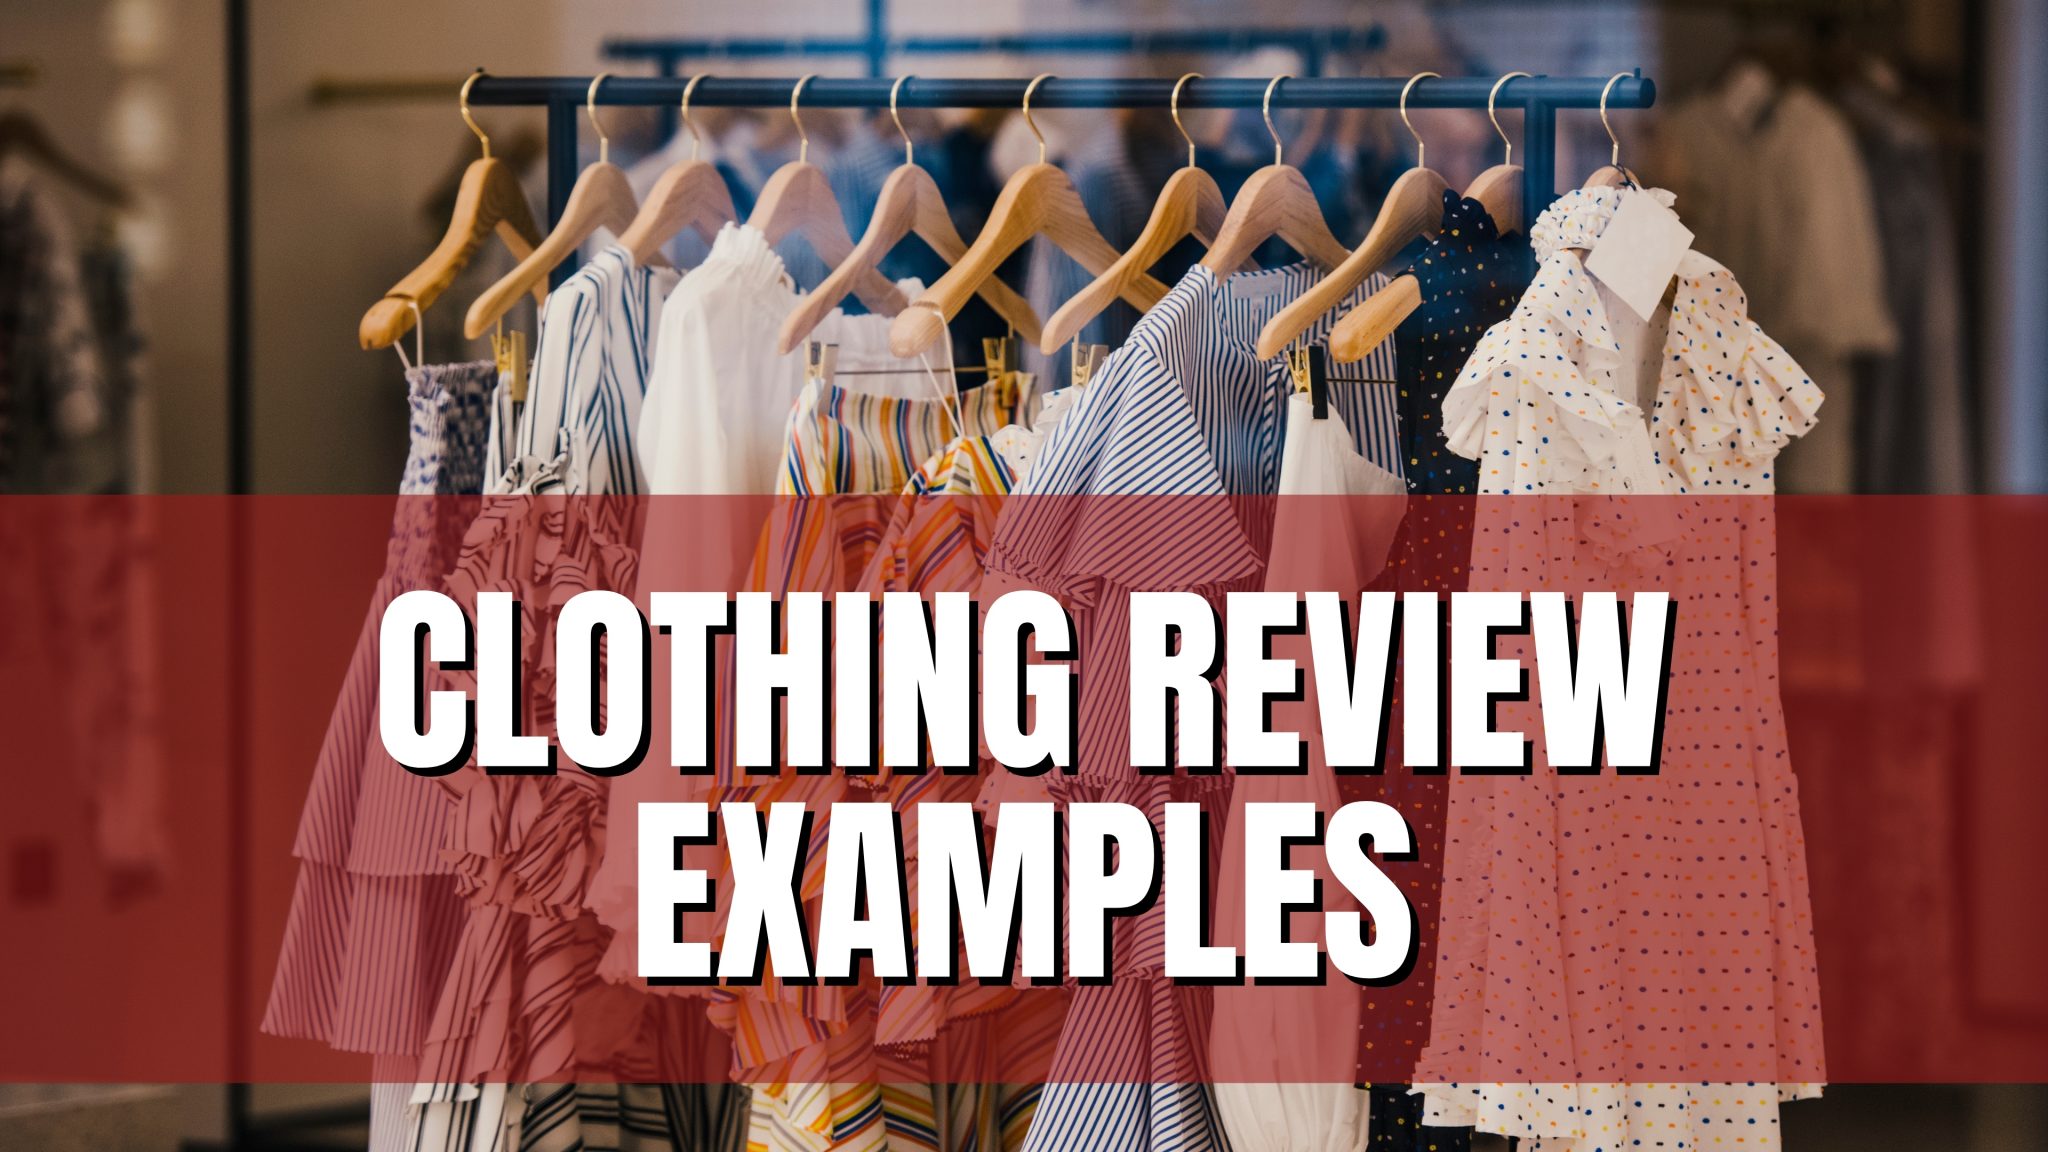 Clothing Review Examples